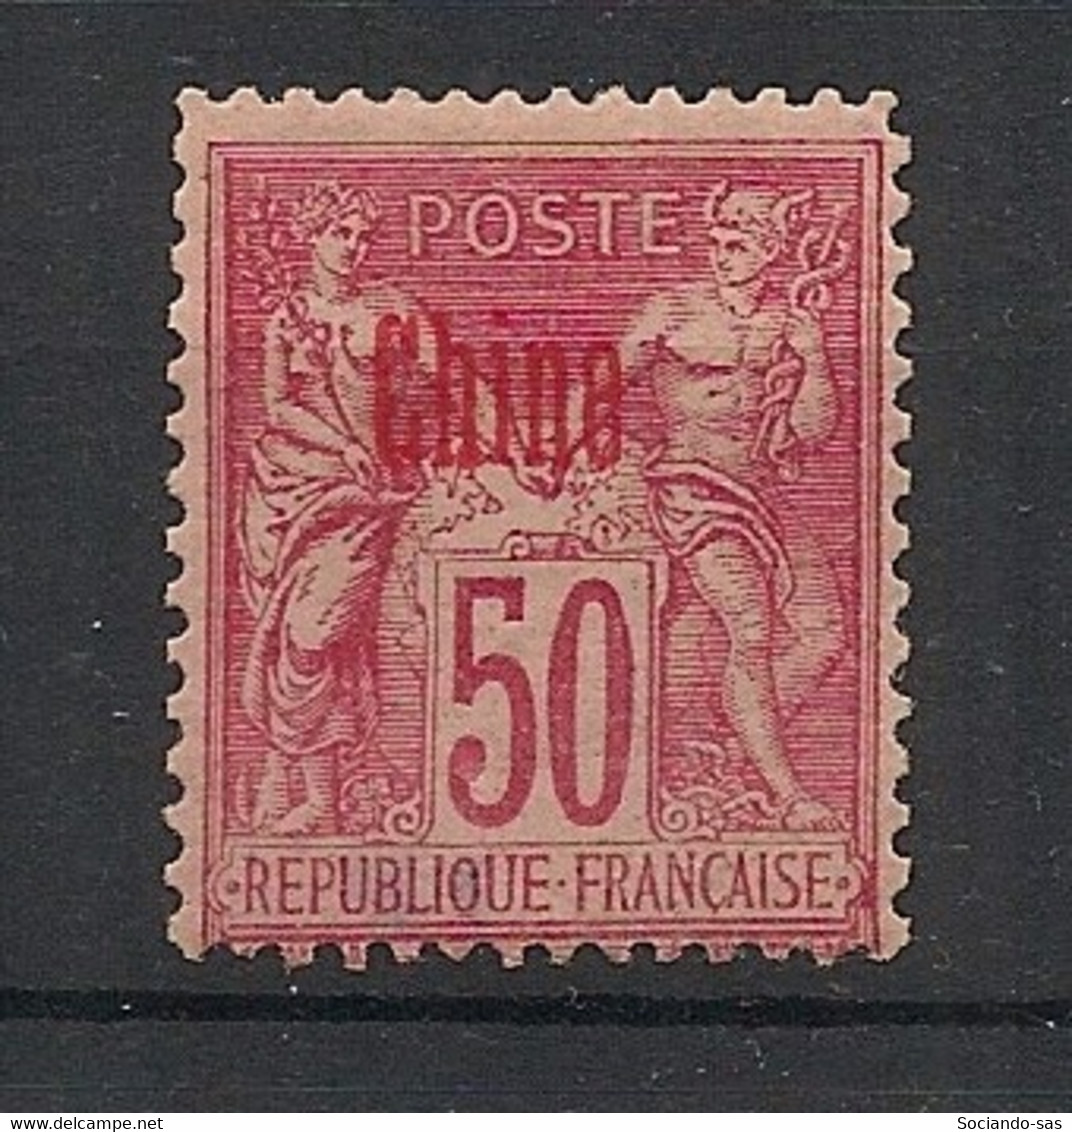 CHINE - 1894-1900 - N°Yv. 12a - Type Sage - 50c Rose - Type II - Surcharge Carmin - Neuf * / MH VF - Nuovi